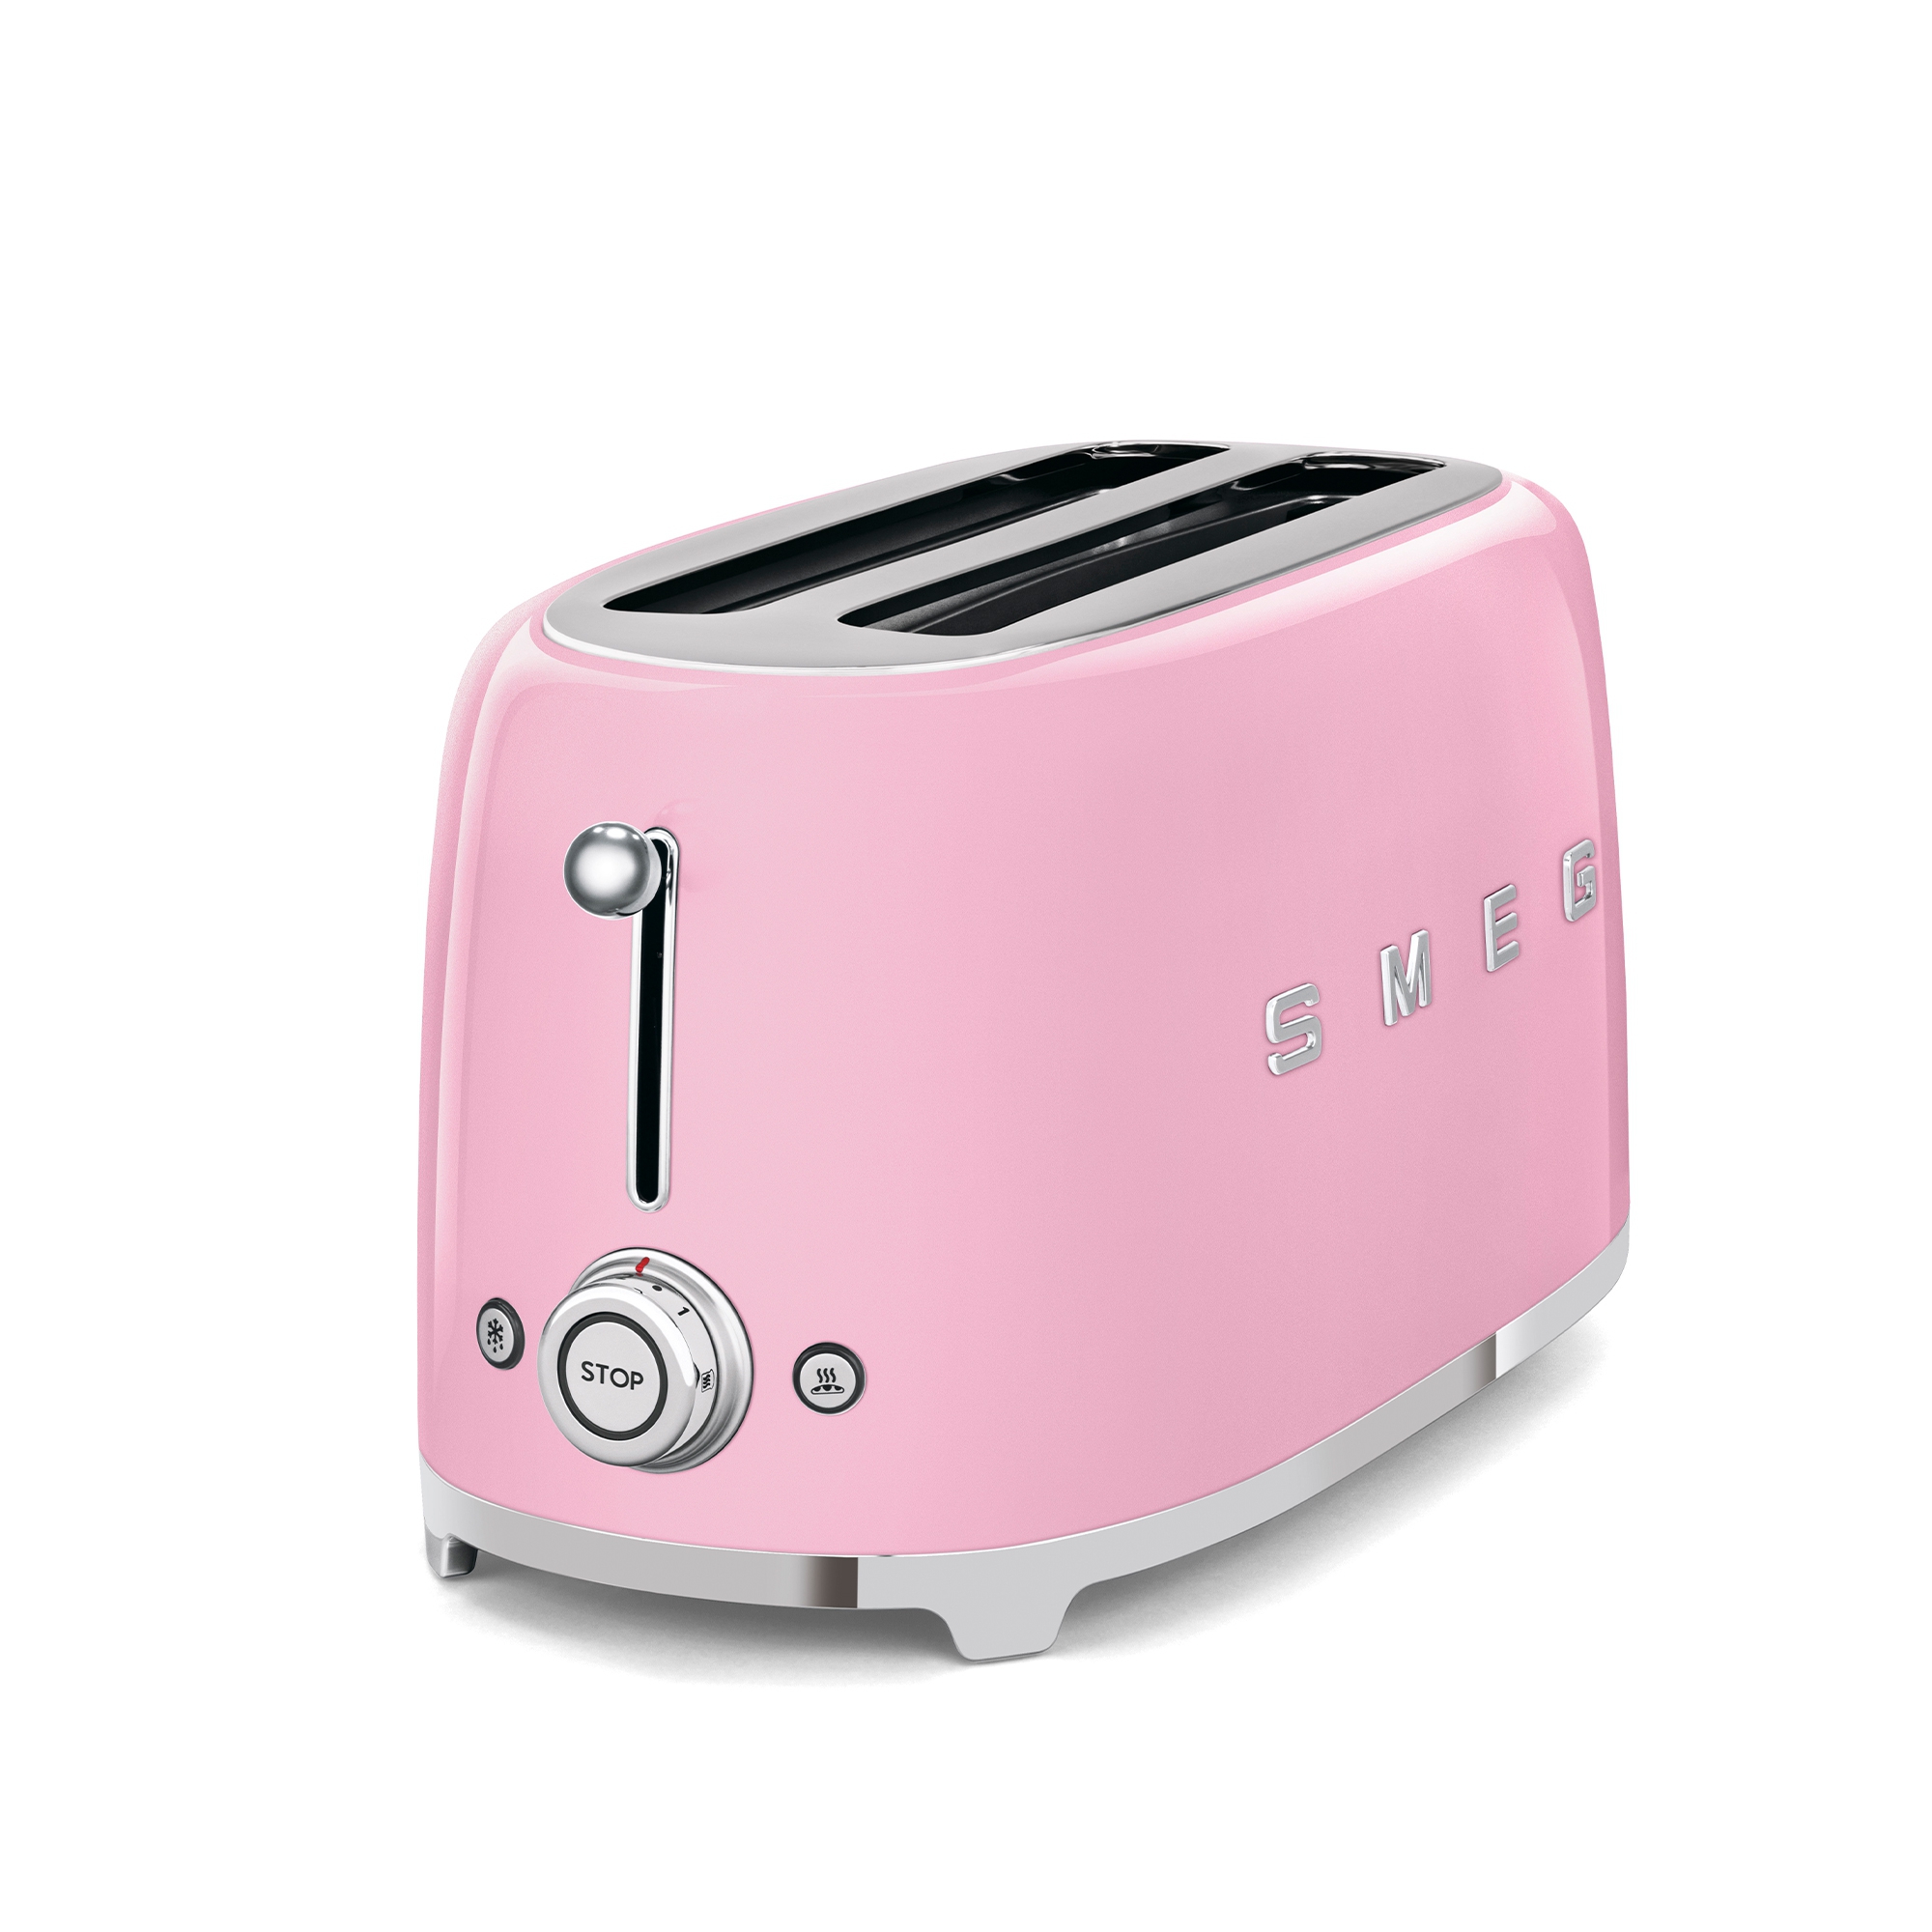 Smeg - 2-slot toaster long TSF02 - design line style The 50 ° years